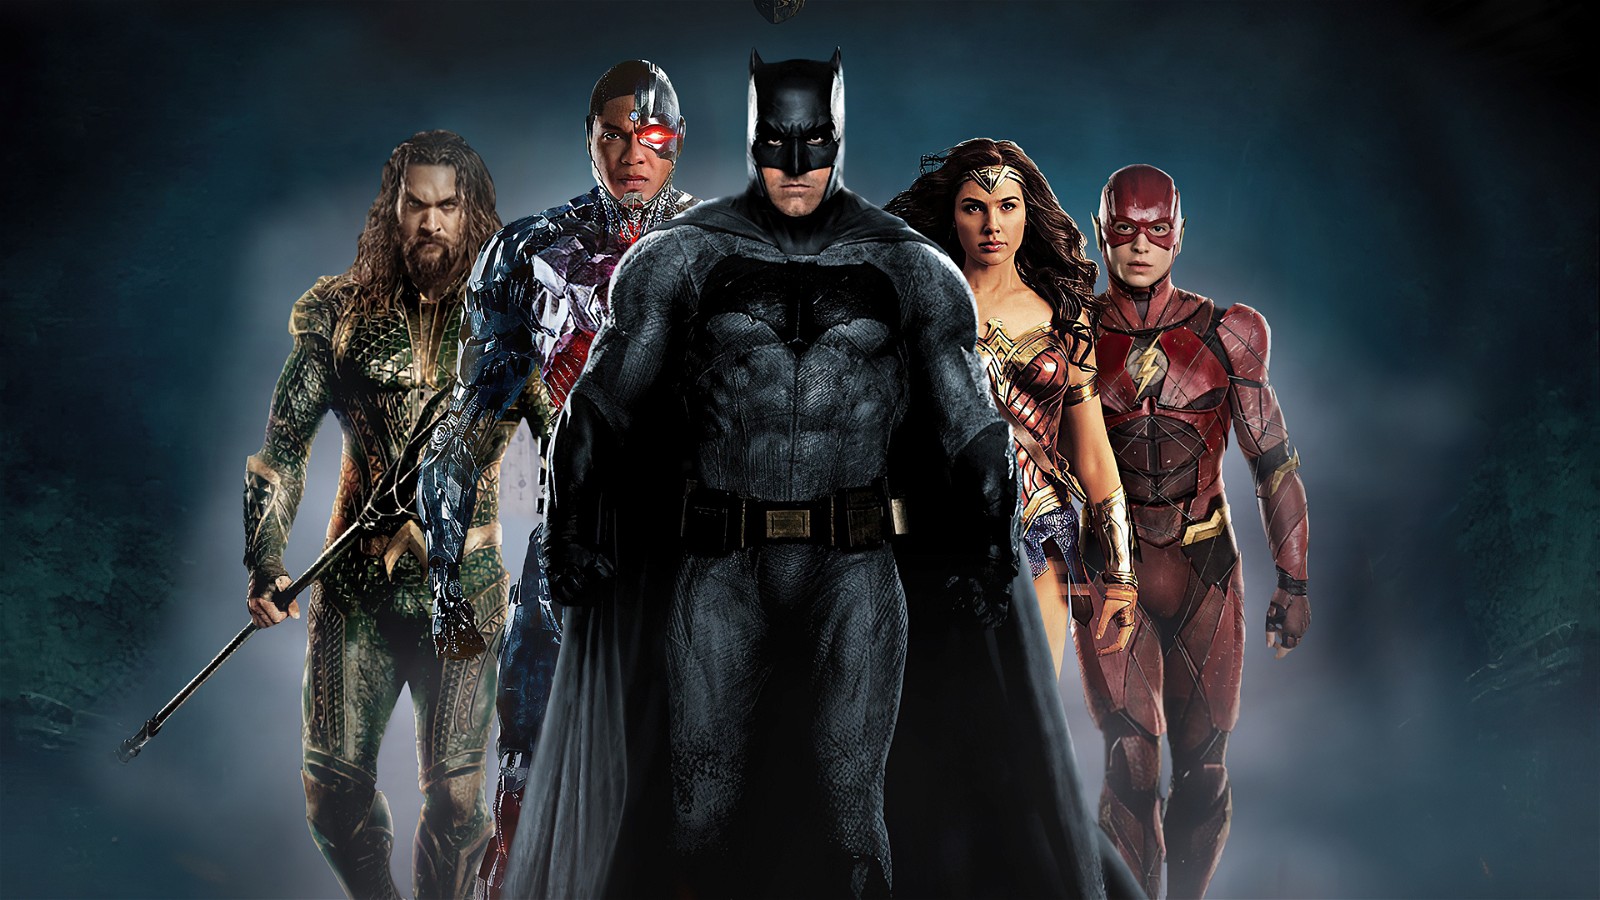 The Justice League as they appear in the film.